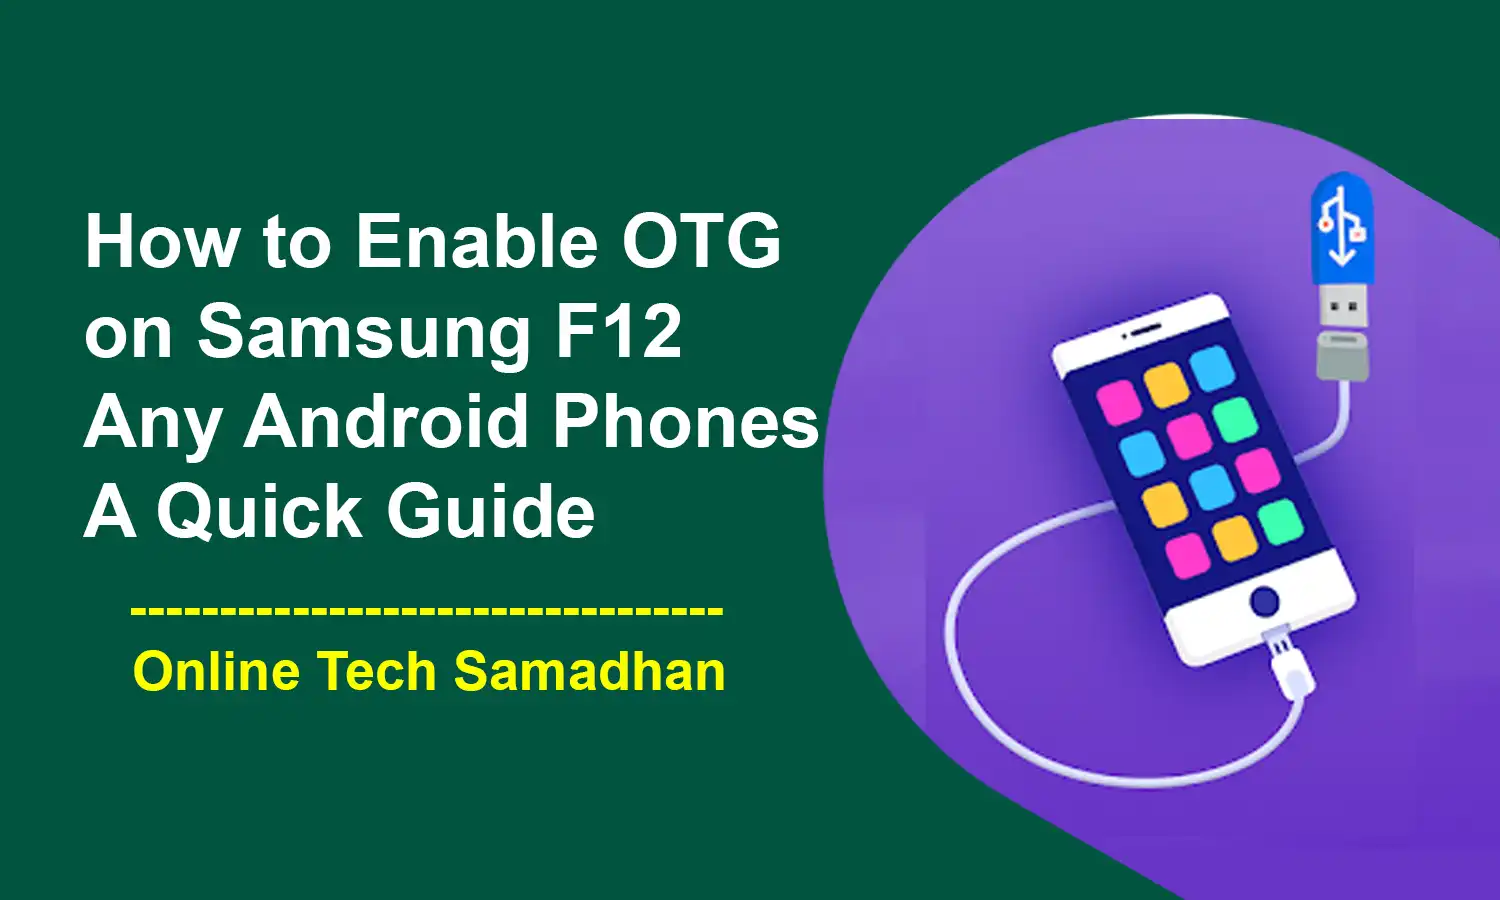 How to Enable OTG on Samsung F12